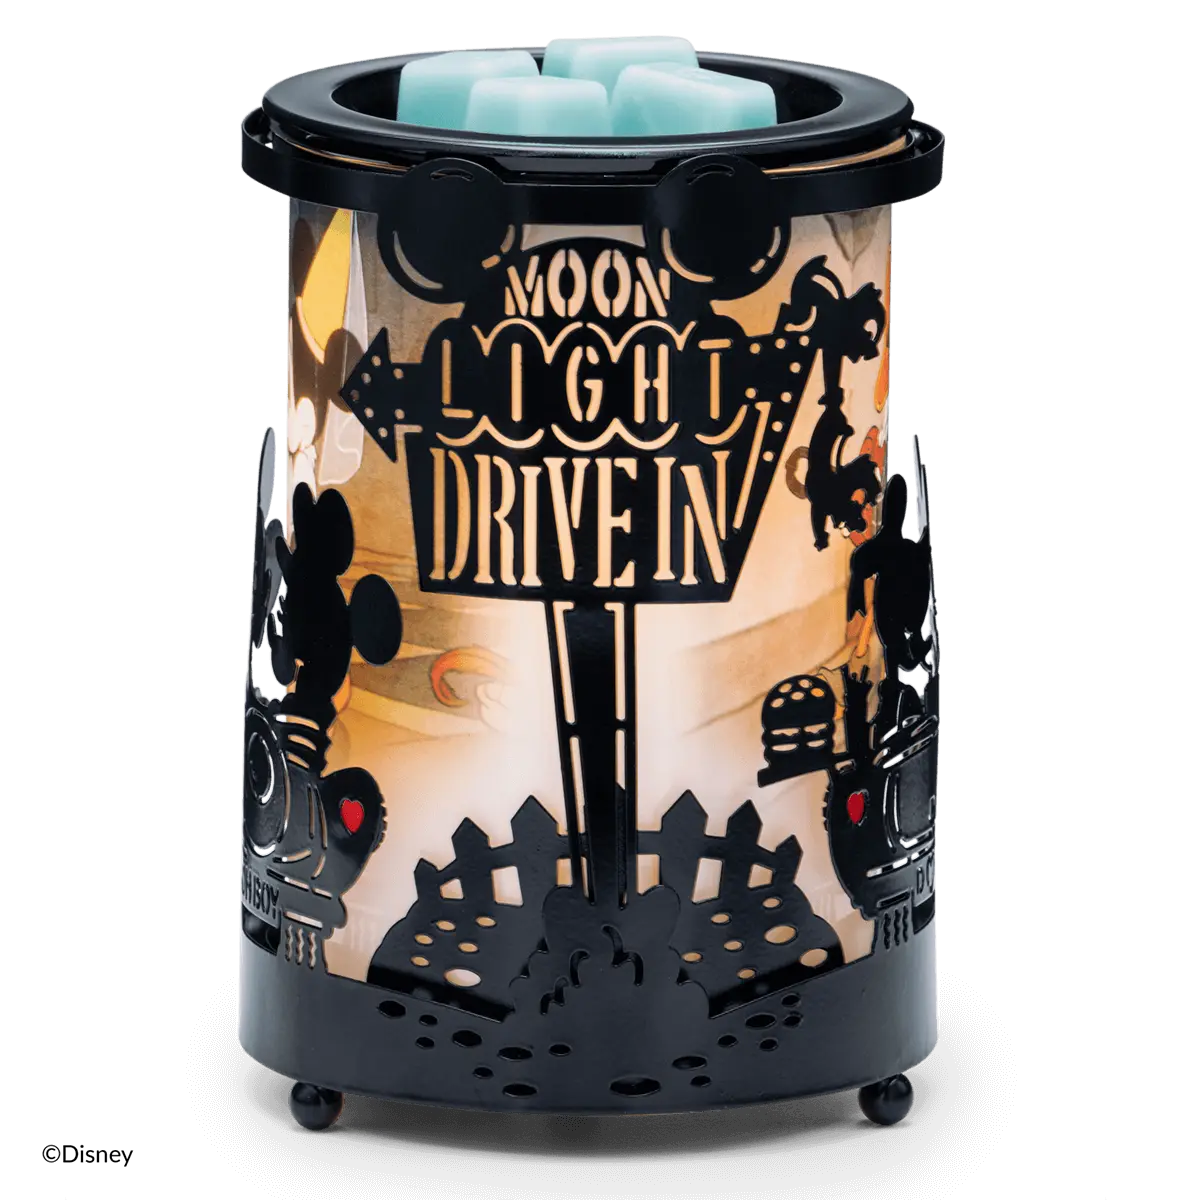 Replacement Dish for Disney Drive-In - Scentsy Warmer